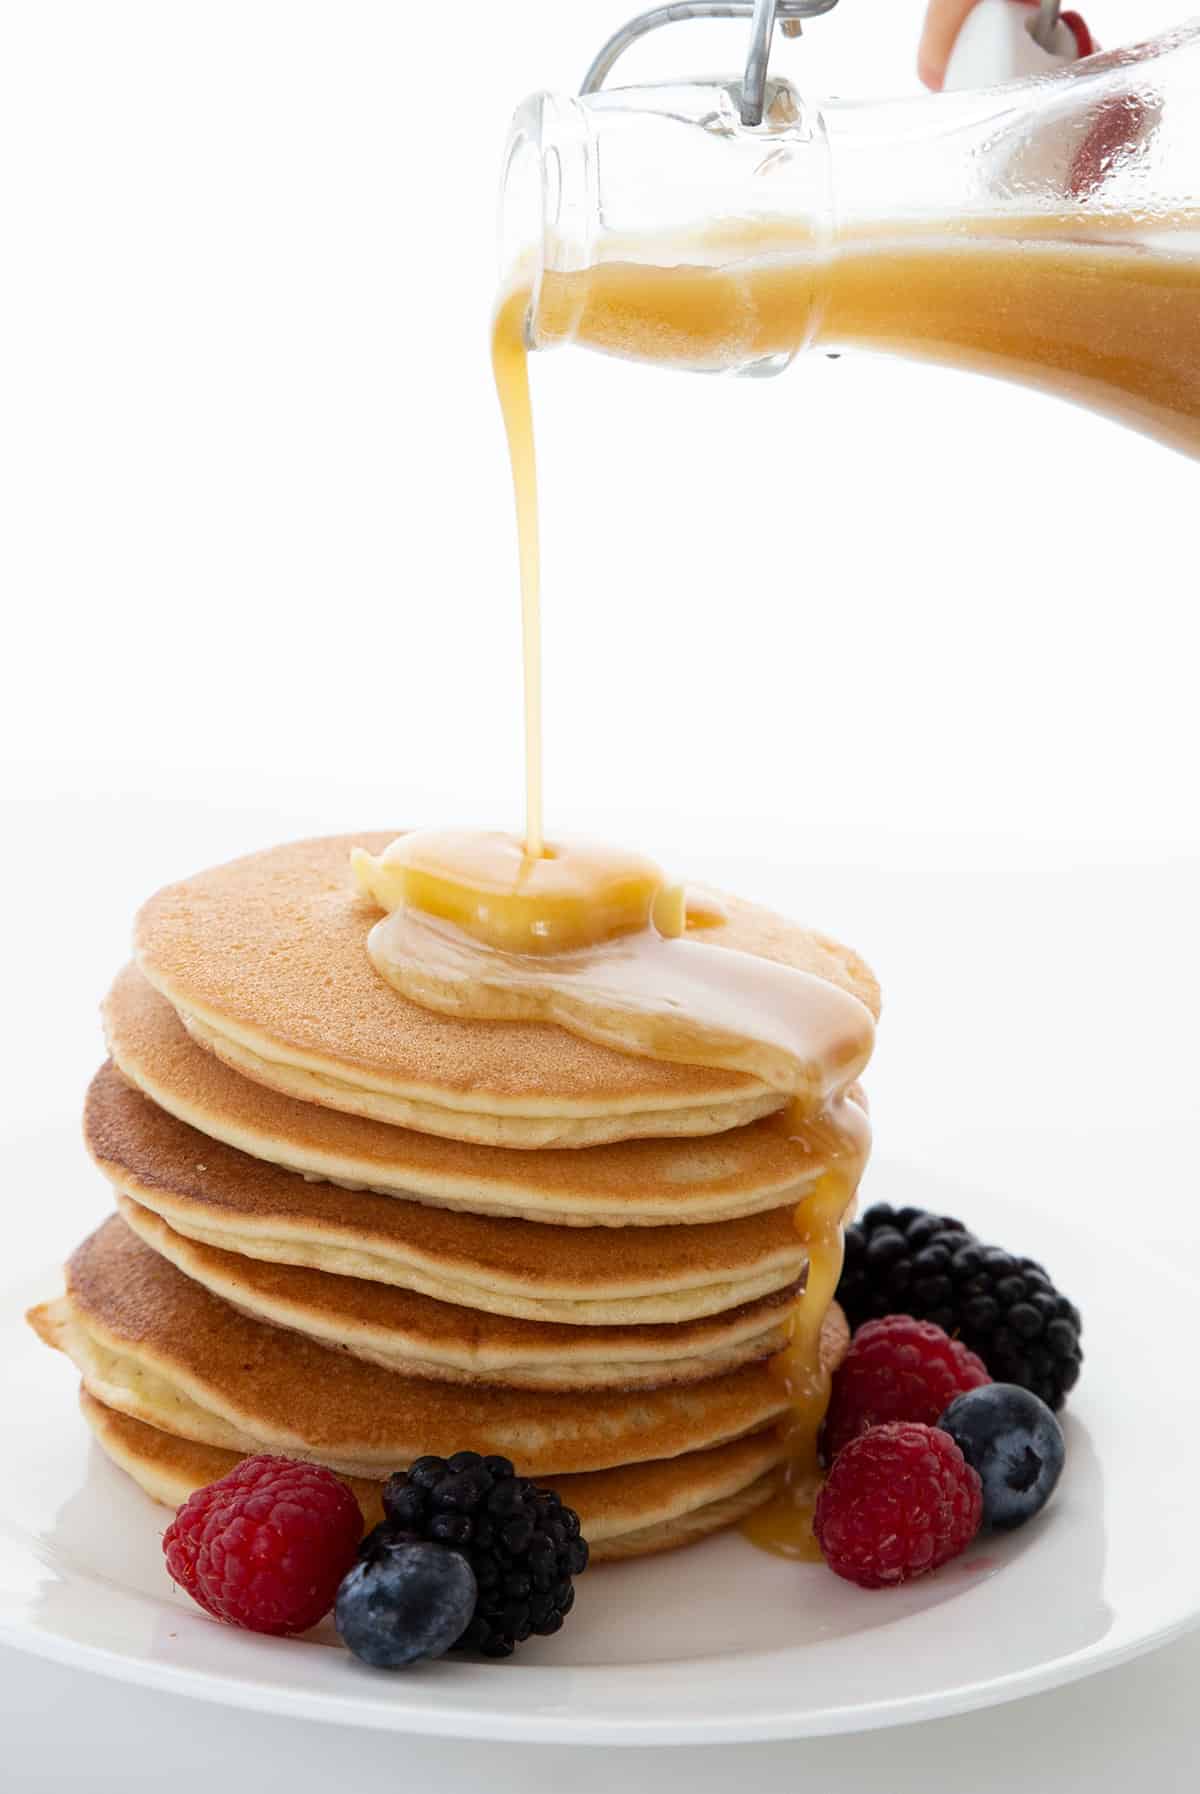 Sugar free keto syrup being poured over a stack of keto pancakes.